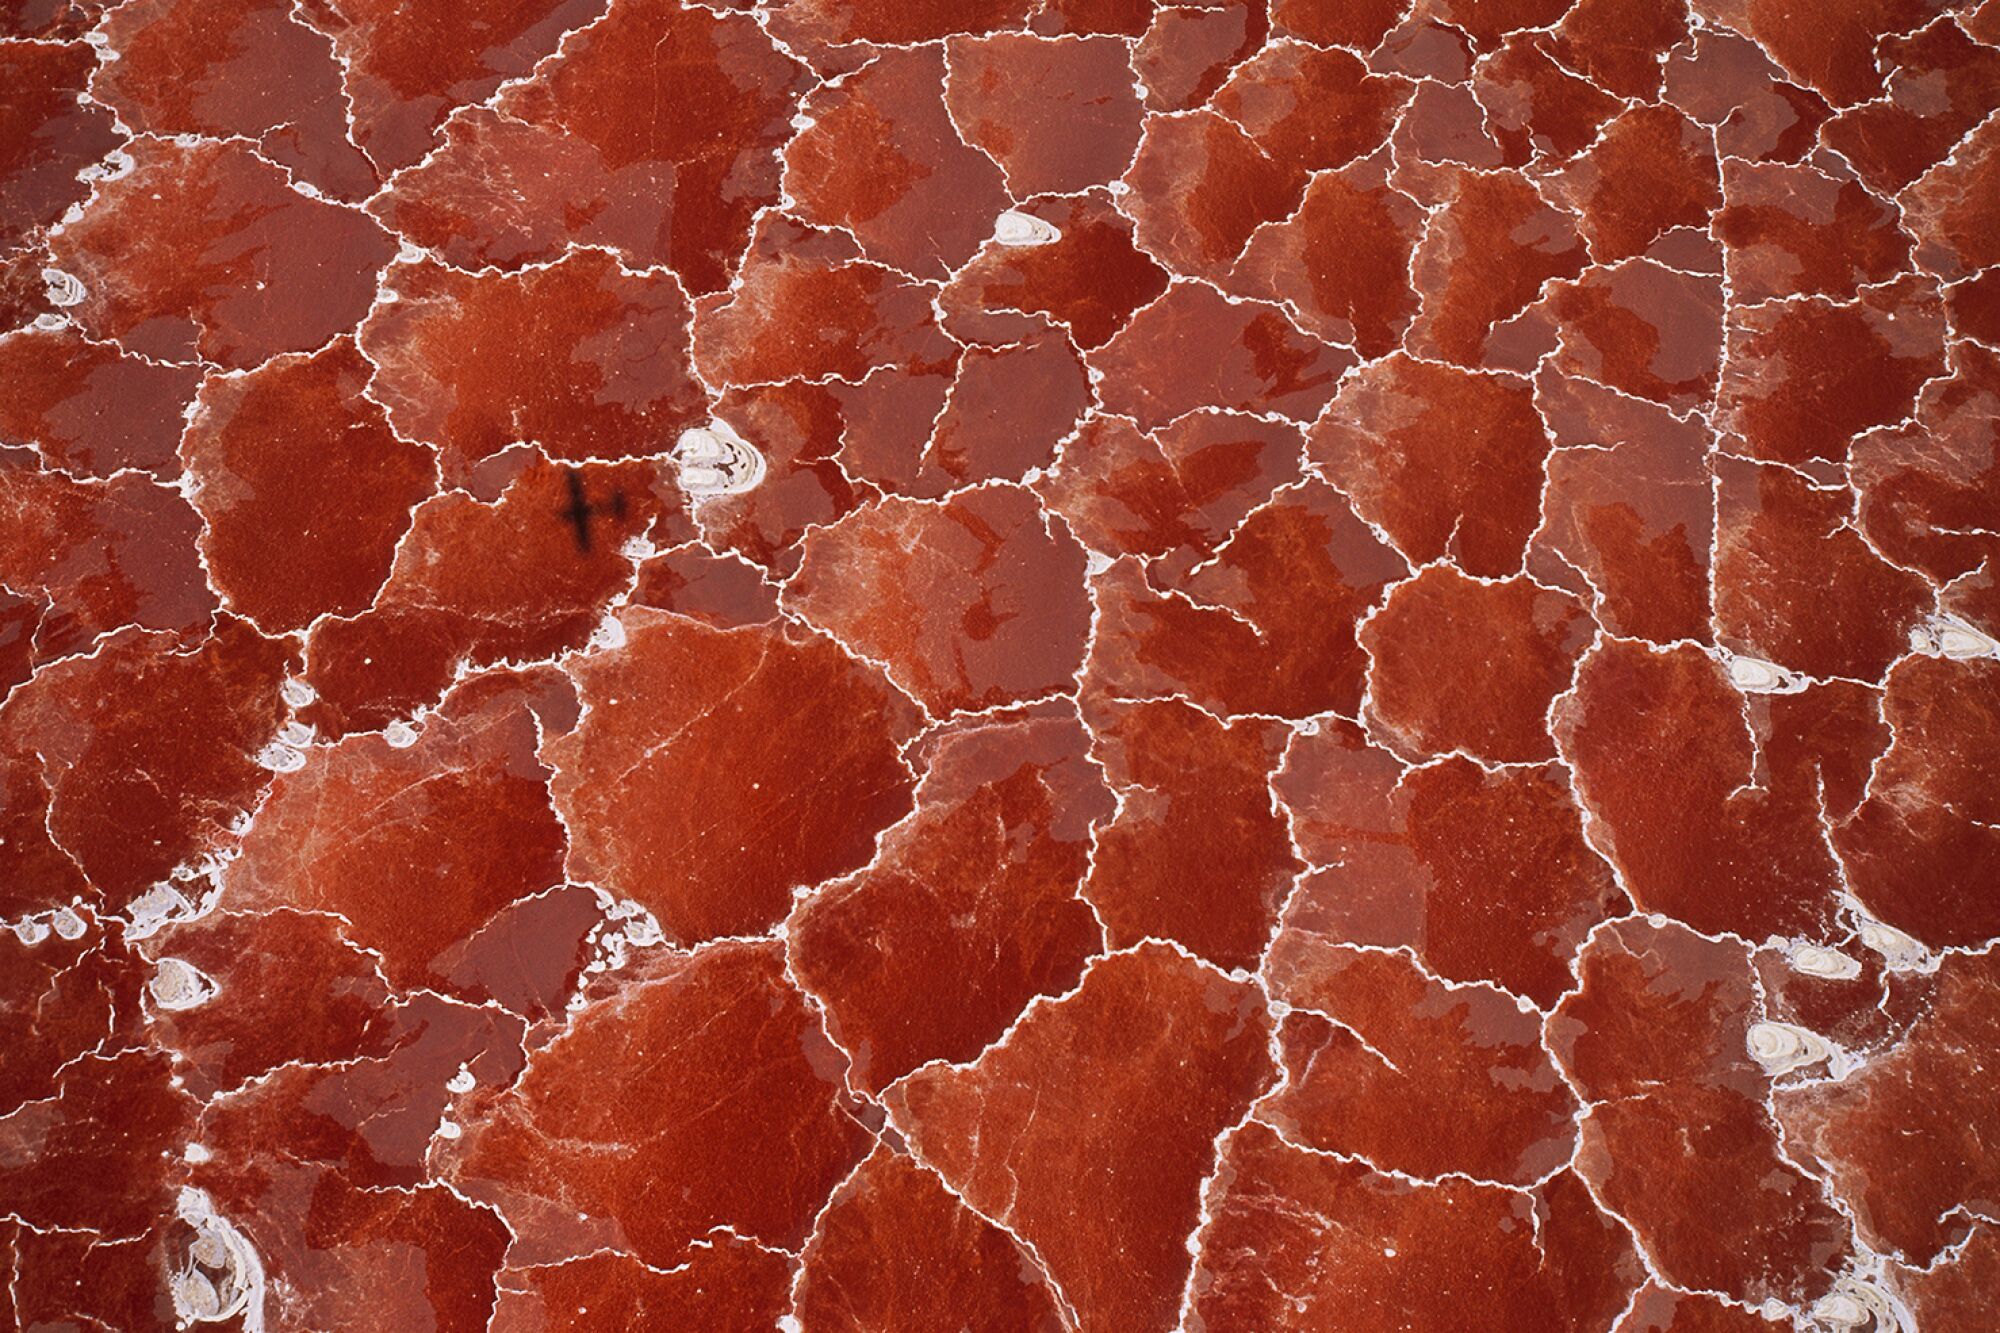 Salt-loving algae gives a red color to the hyper-saline waters of Lake Natron in the Great Rift Valley on the border between Tanzania and Kenya.  The lake has an unusual mineral content that is leached from the surrounding volcanoes.  The temperatures in the salty mud can reach 50 degrees Celsius (120 degrees Fahrenheit), and depending on rainfall, the alkalinity can reach a pH of 9 to 10.5 (almost as alkaline as straight ammonia).